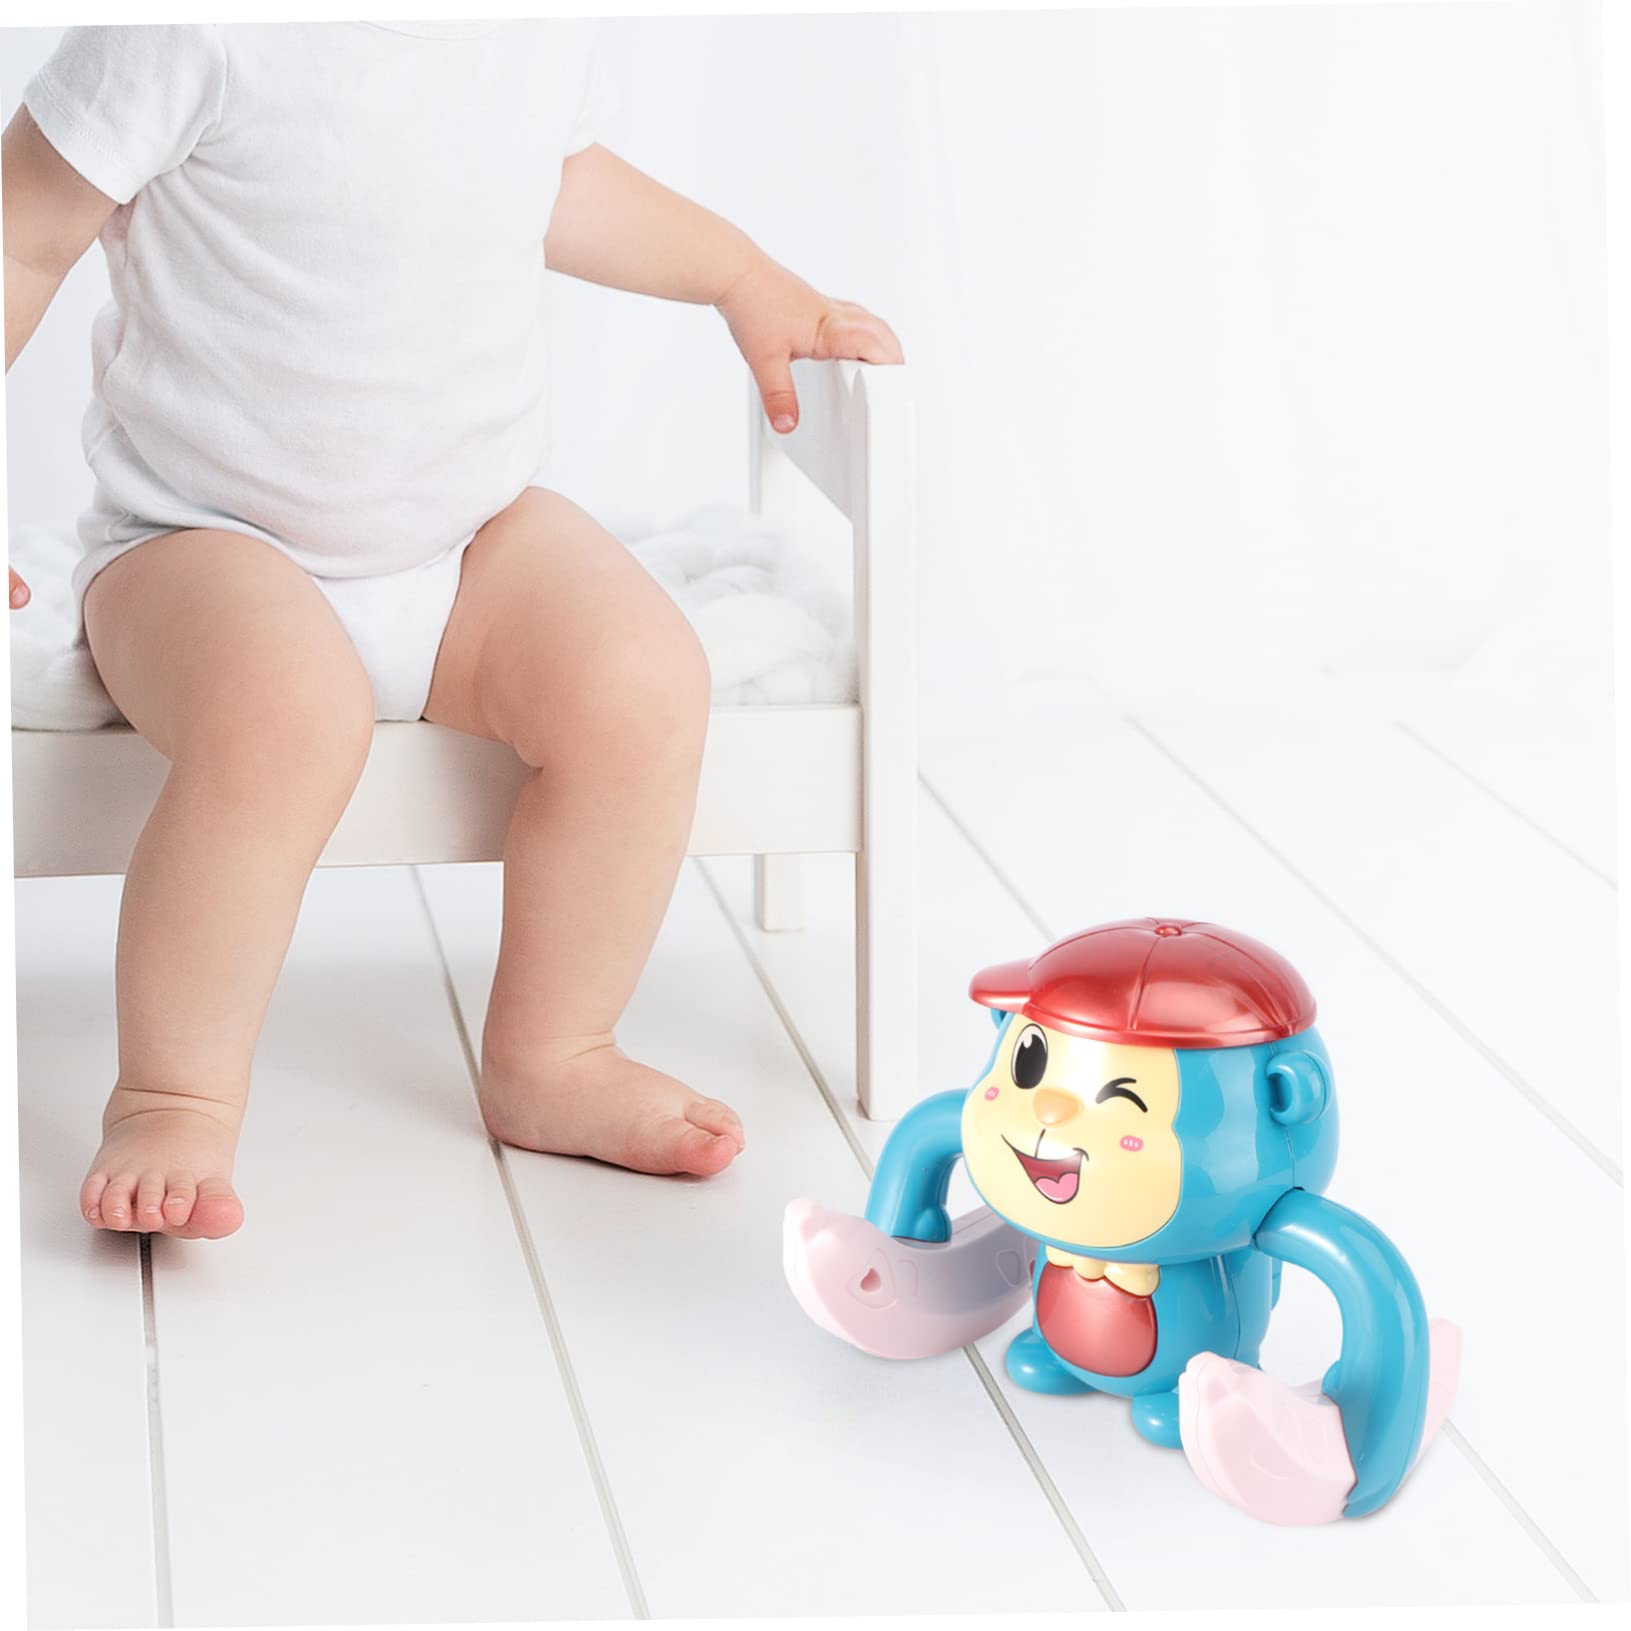 ERINGOGO 2 Pcs Rolling Monkey Toy Music Animal Toy Robot Toys Interactive Crawling Toy Toys for Kids Cute Doll Table Decoration Toy for Kids Cartoon Electronic Component Somersault Baby